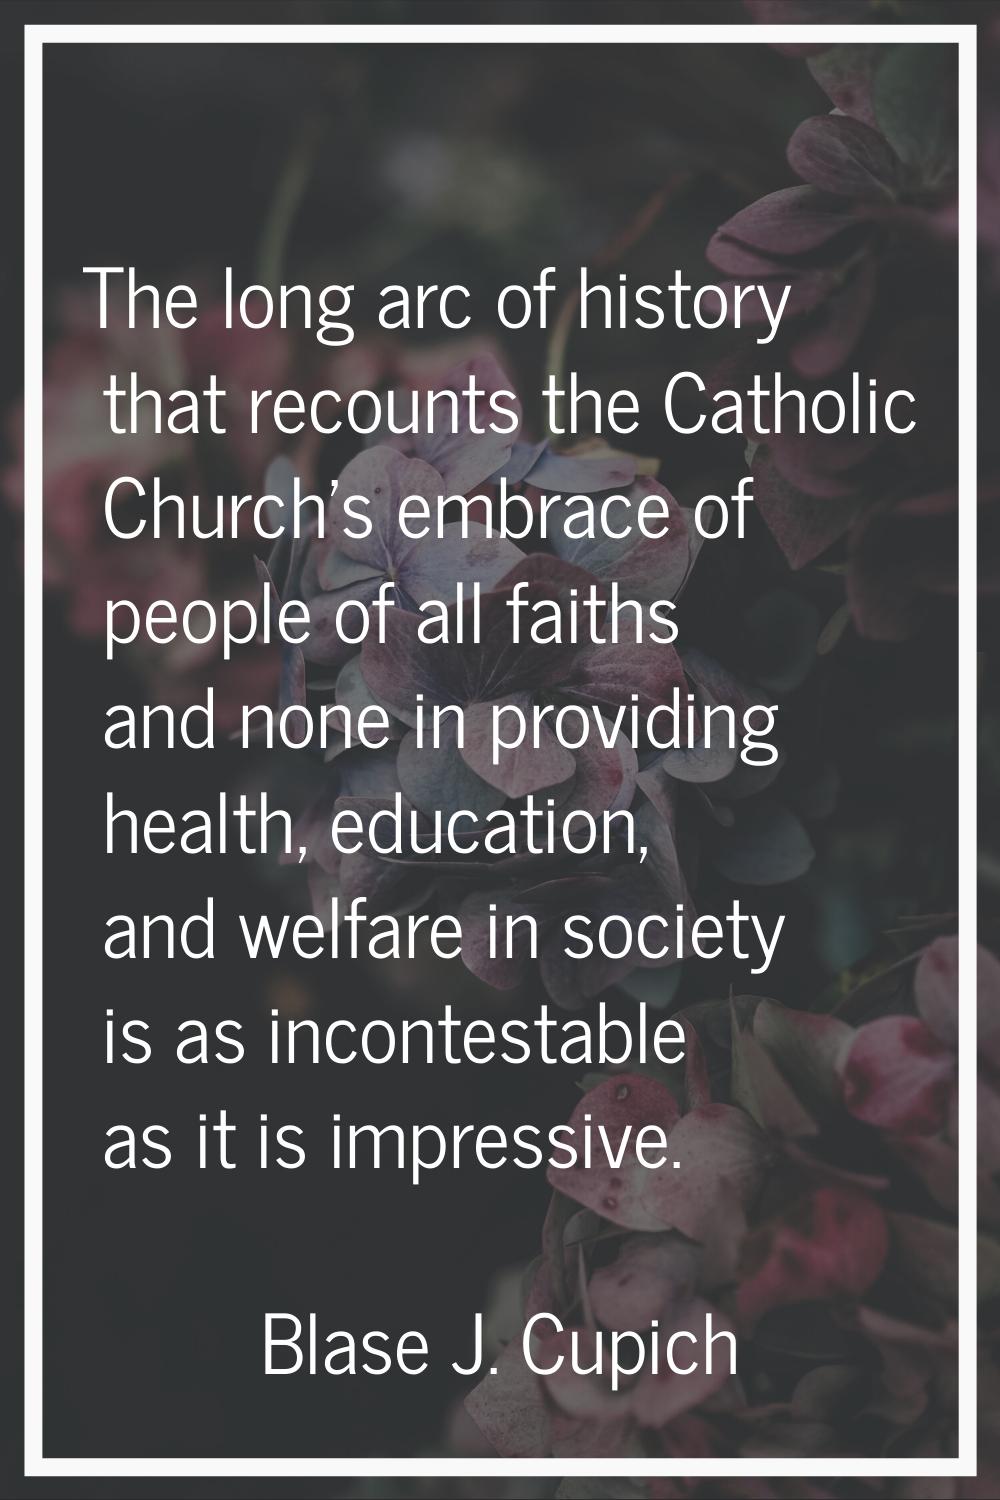 The long arc of history that recounts the Catholic Church's embrace of people of all faiths and non